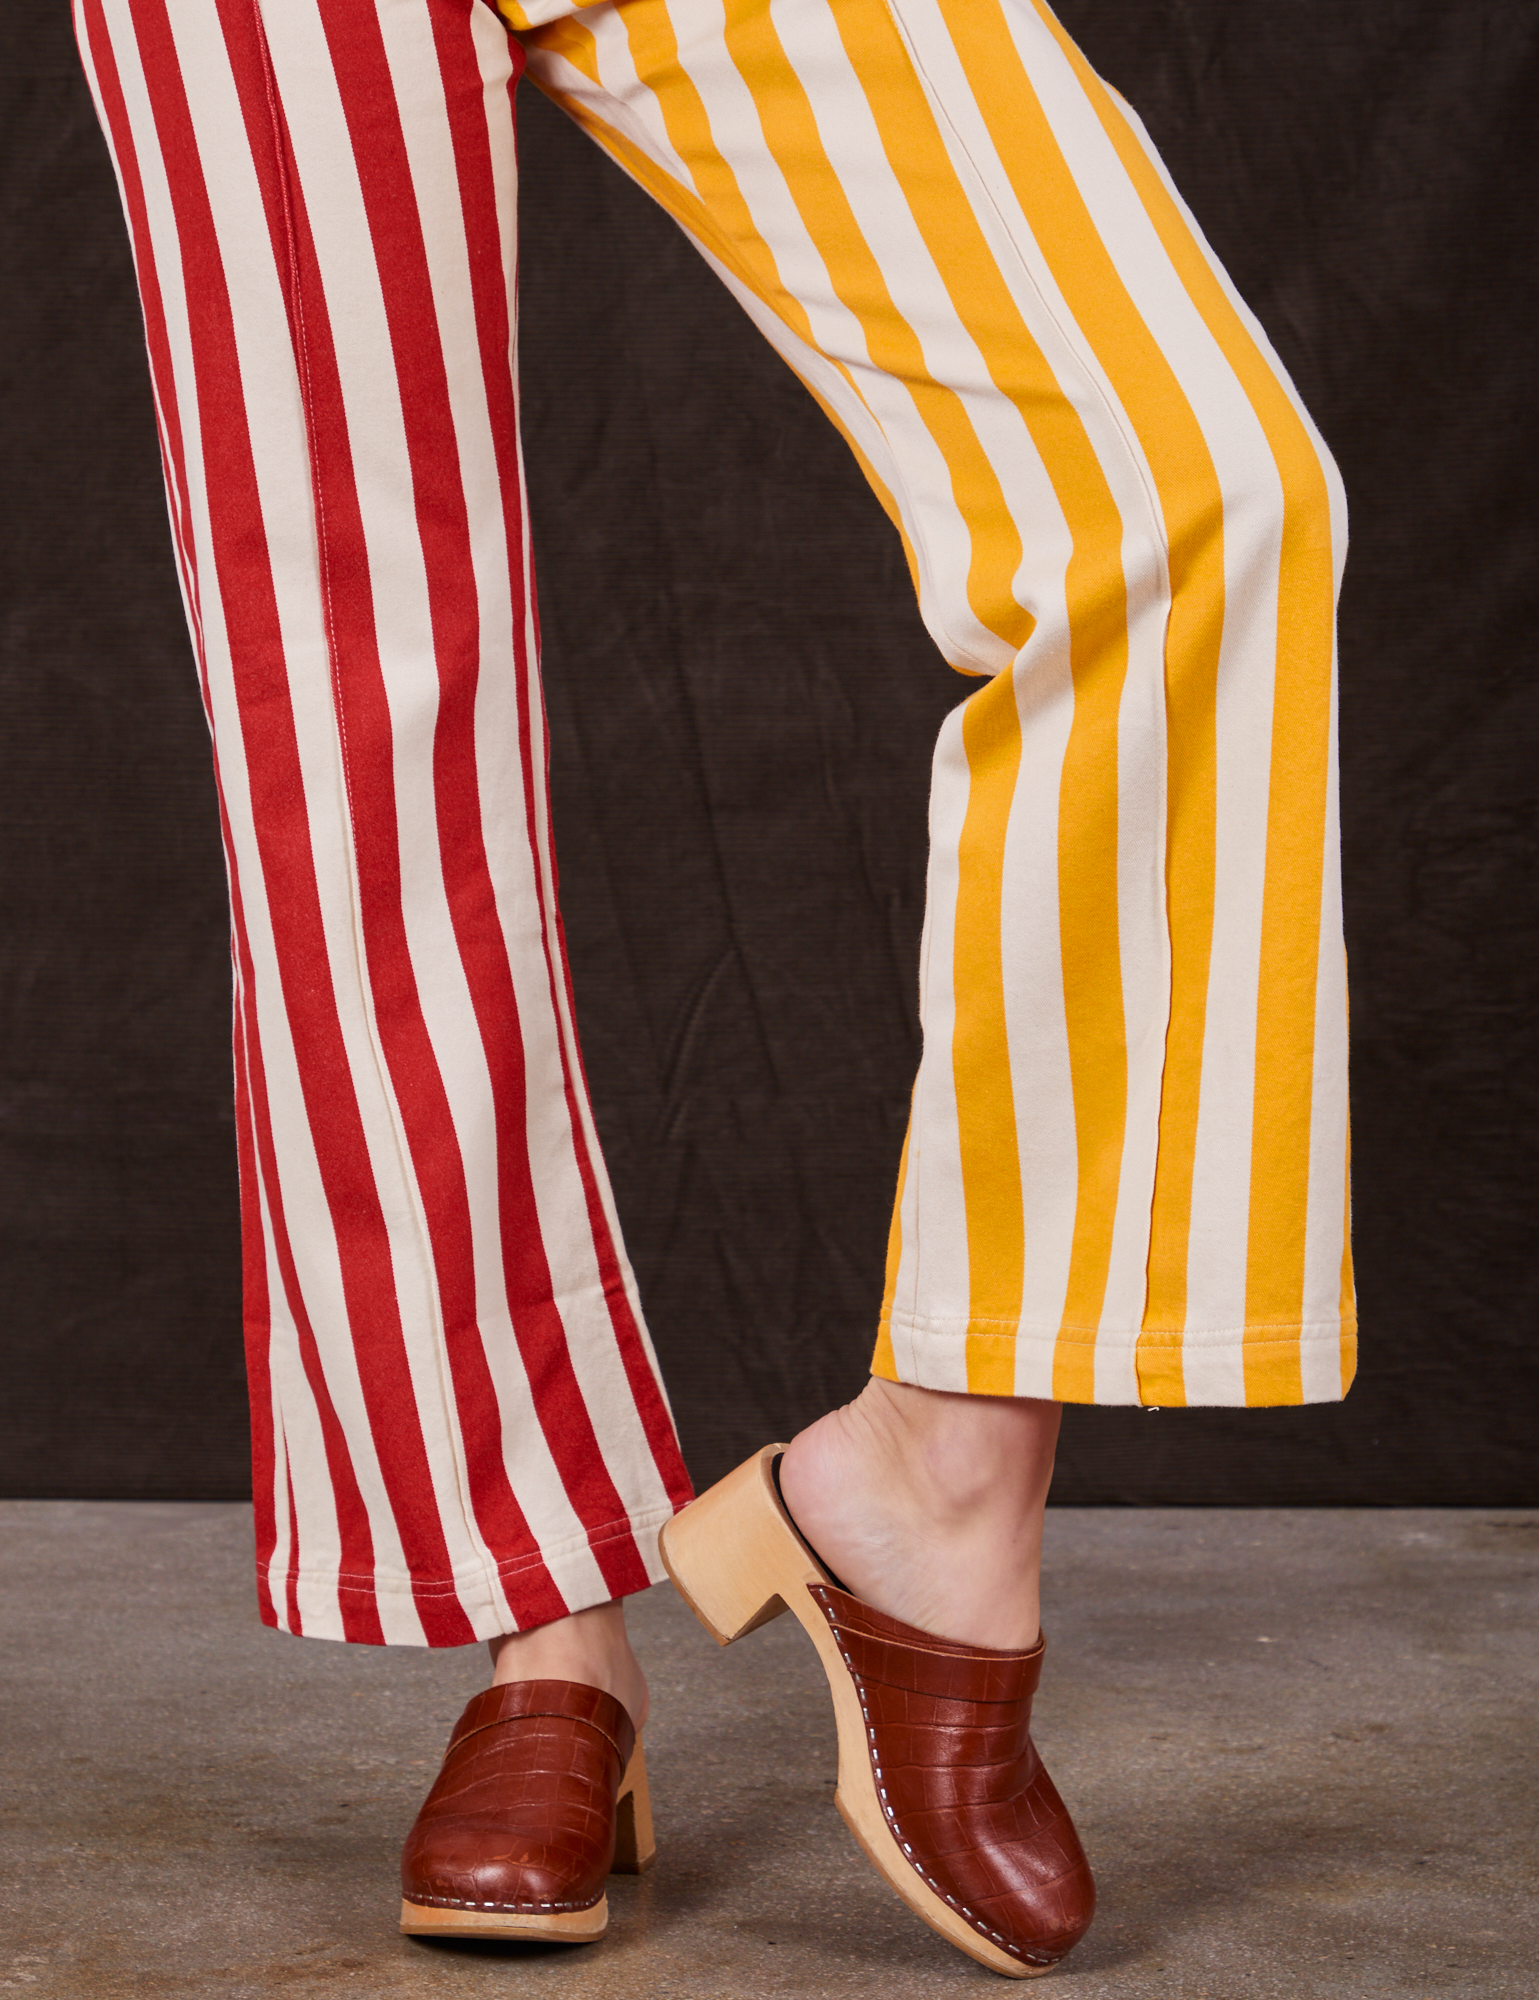 Western Pants in Ketchup/Mustard Stripes pant leg close up on Alex